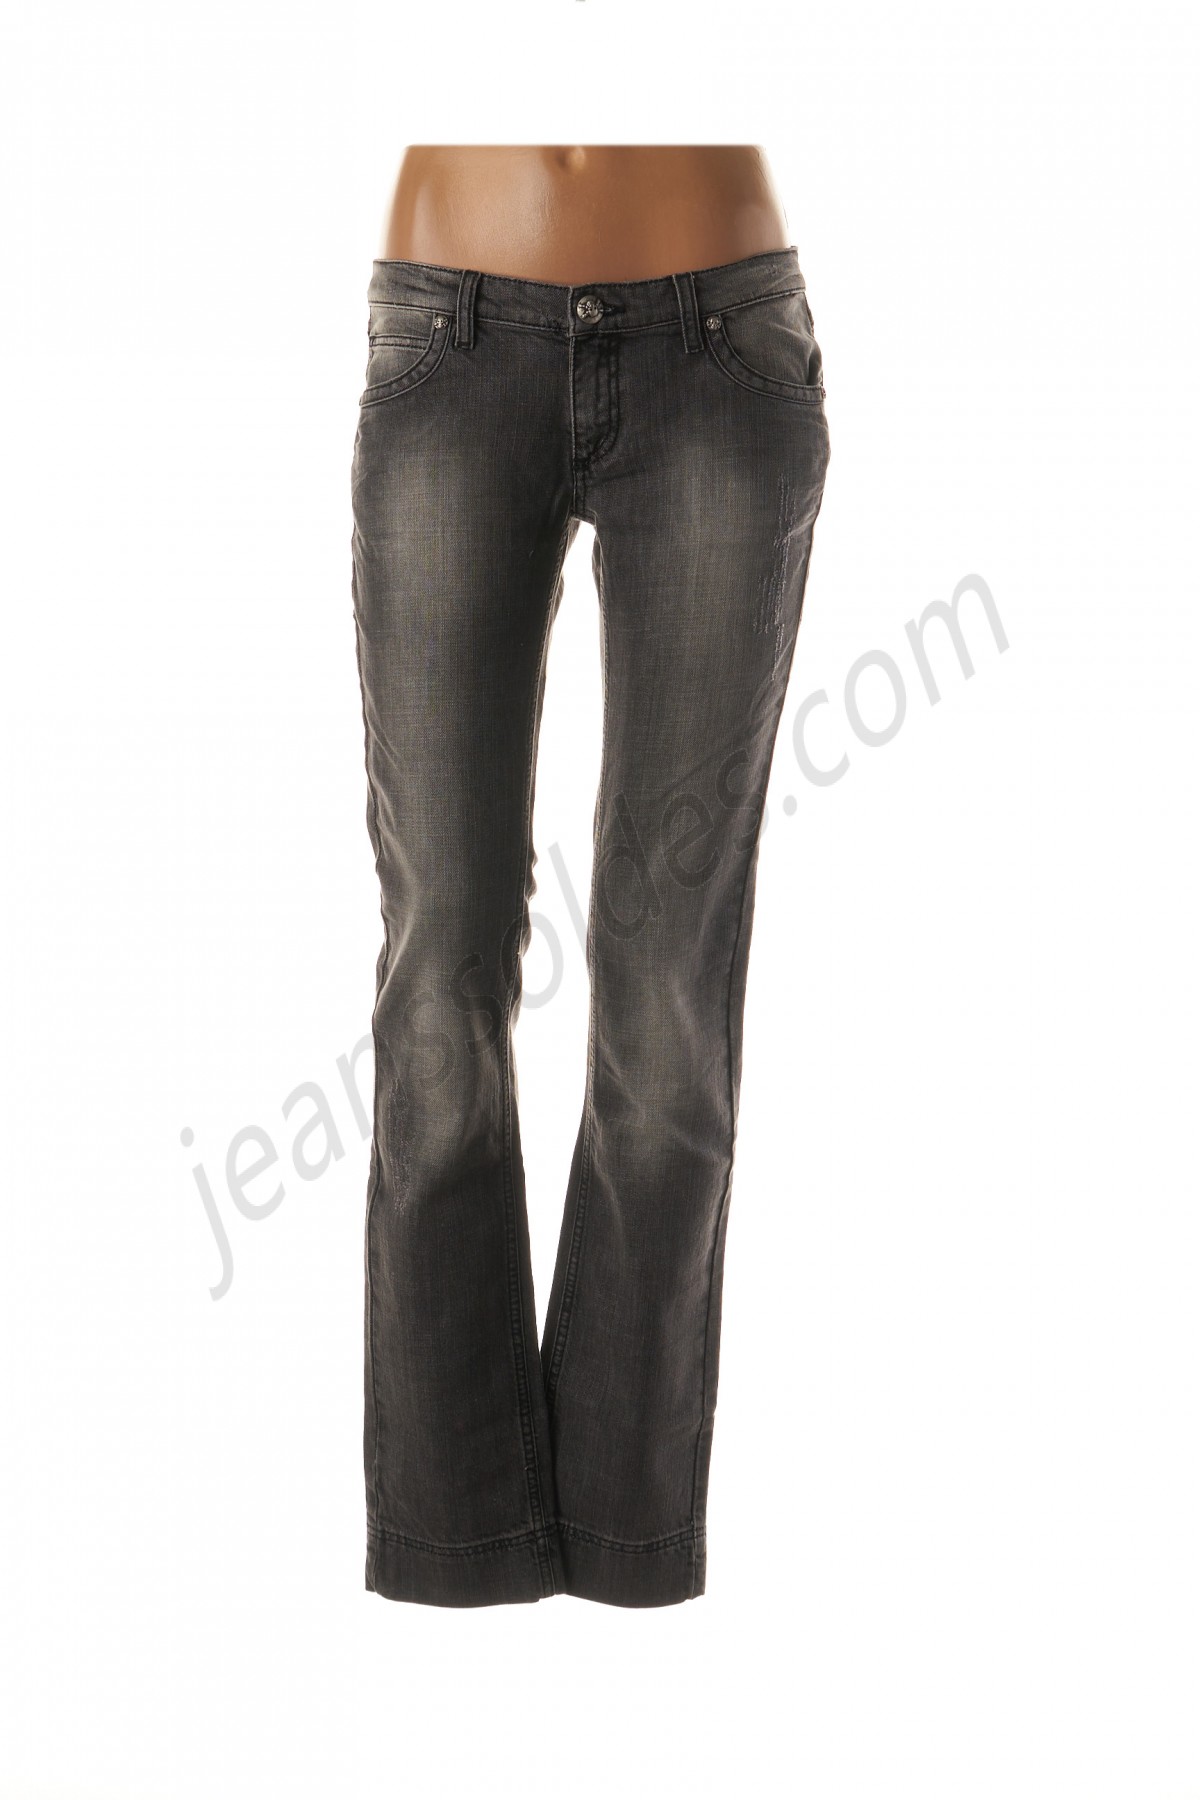 n&vy-Jeans coupe droite prix d’amis - -0